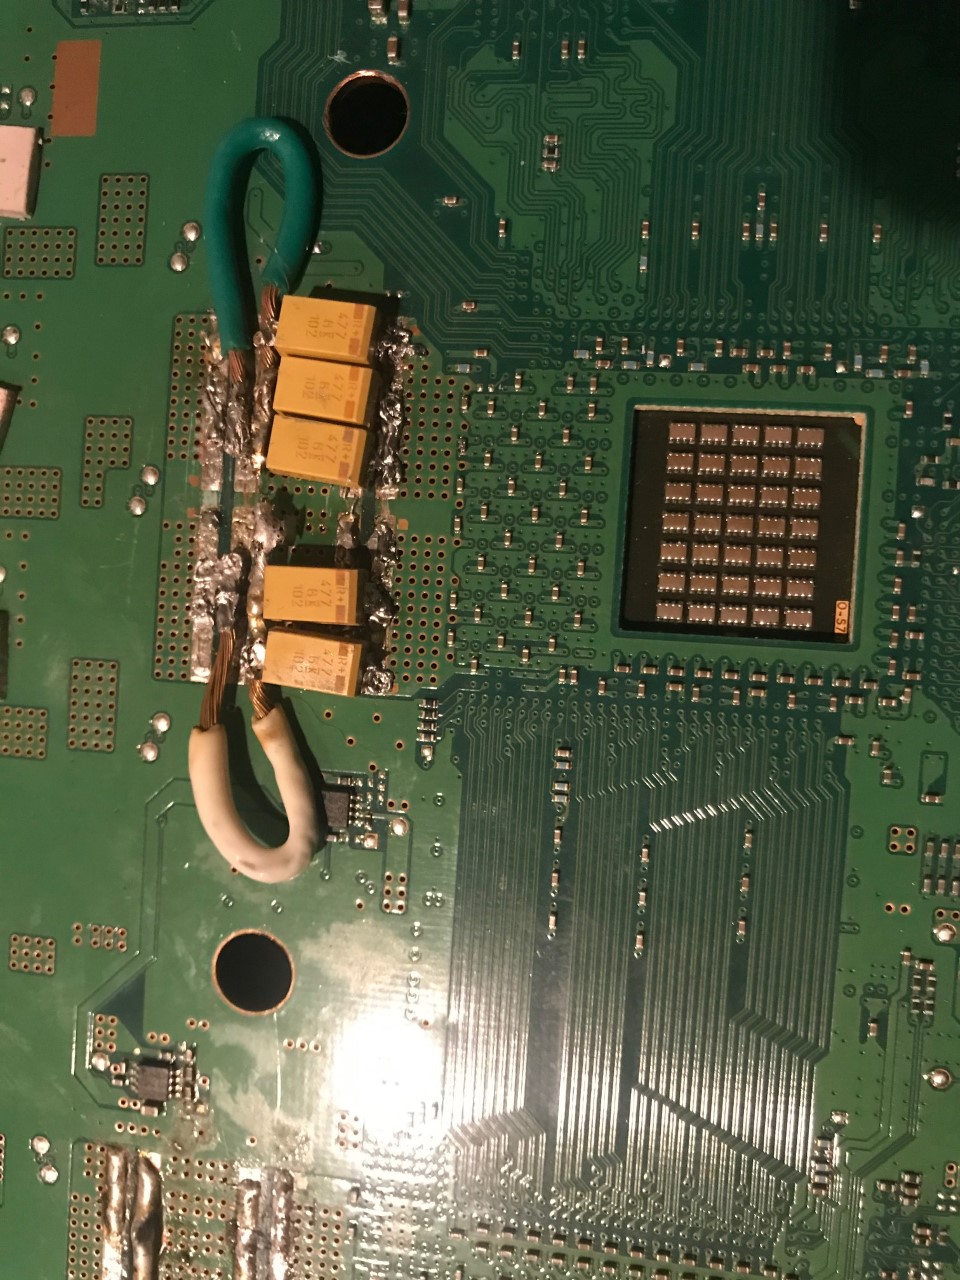 The Reality Of Repairing The Ylod In Ps3 Console By Replacing The Nec Tokens By Tantalum Capacitors Reballing Genius Llc